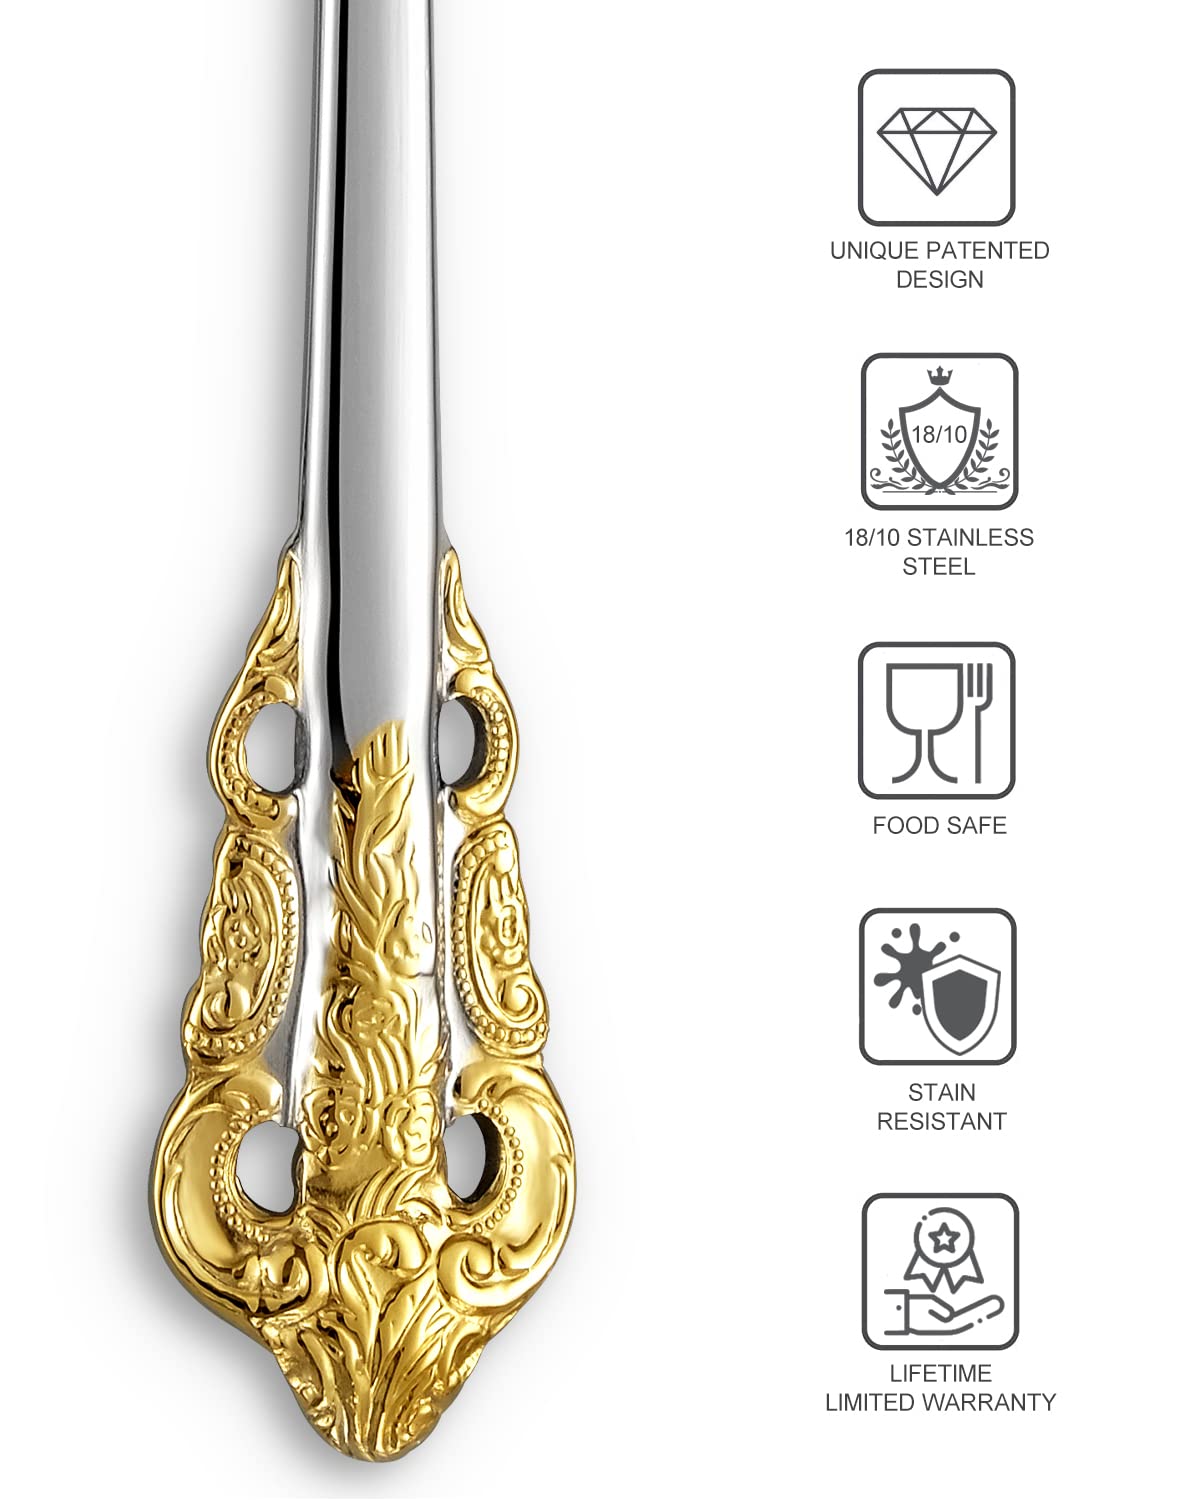 KEAWELL Luxury 6.3" Teaspoons, 18/10 Stainless Steel, Gorgeous Small Spoons, Stirring, Mixing, Sugar, Cake, Dessert Spoons, Mini Antipasto spoons (Gold Accent)